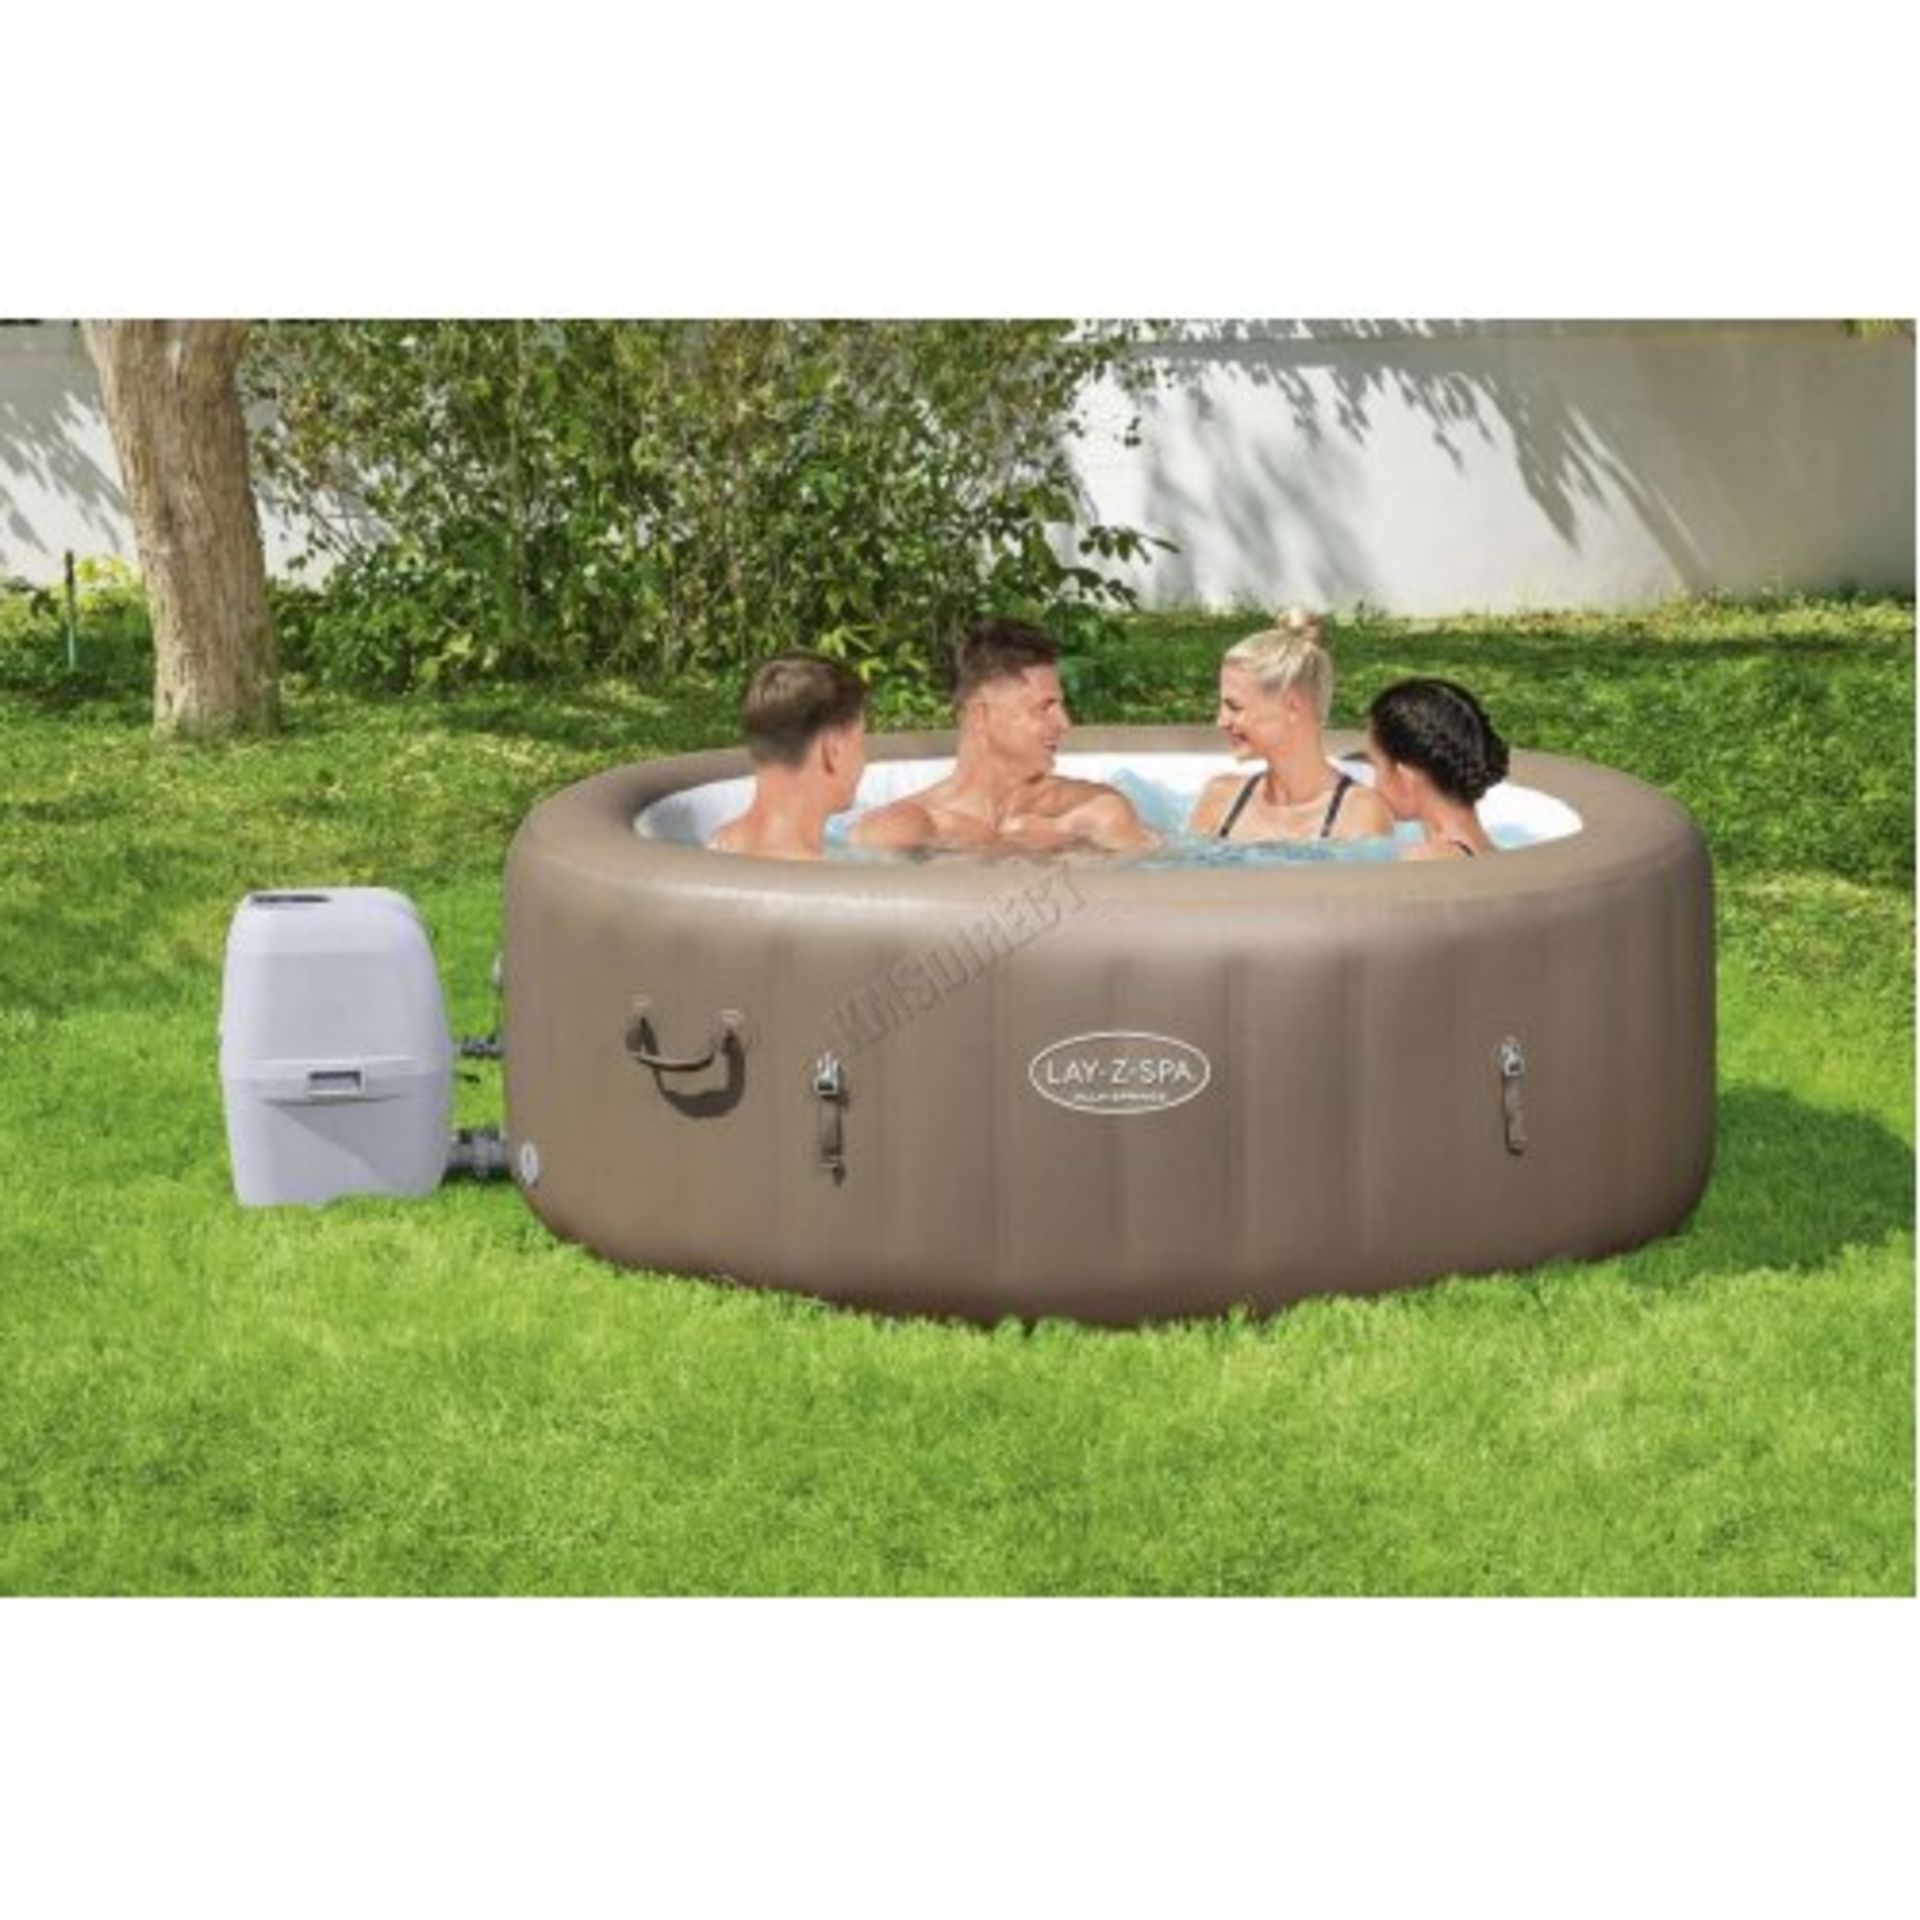 1 X BRAND NEW LAY-Z-SPA PALM SPRINGS PORTABLE SPA - AIR JET SYSTEM - WITH DIGITAL CONTROL PANEL -140